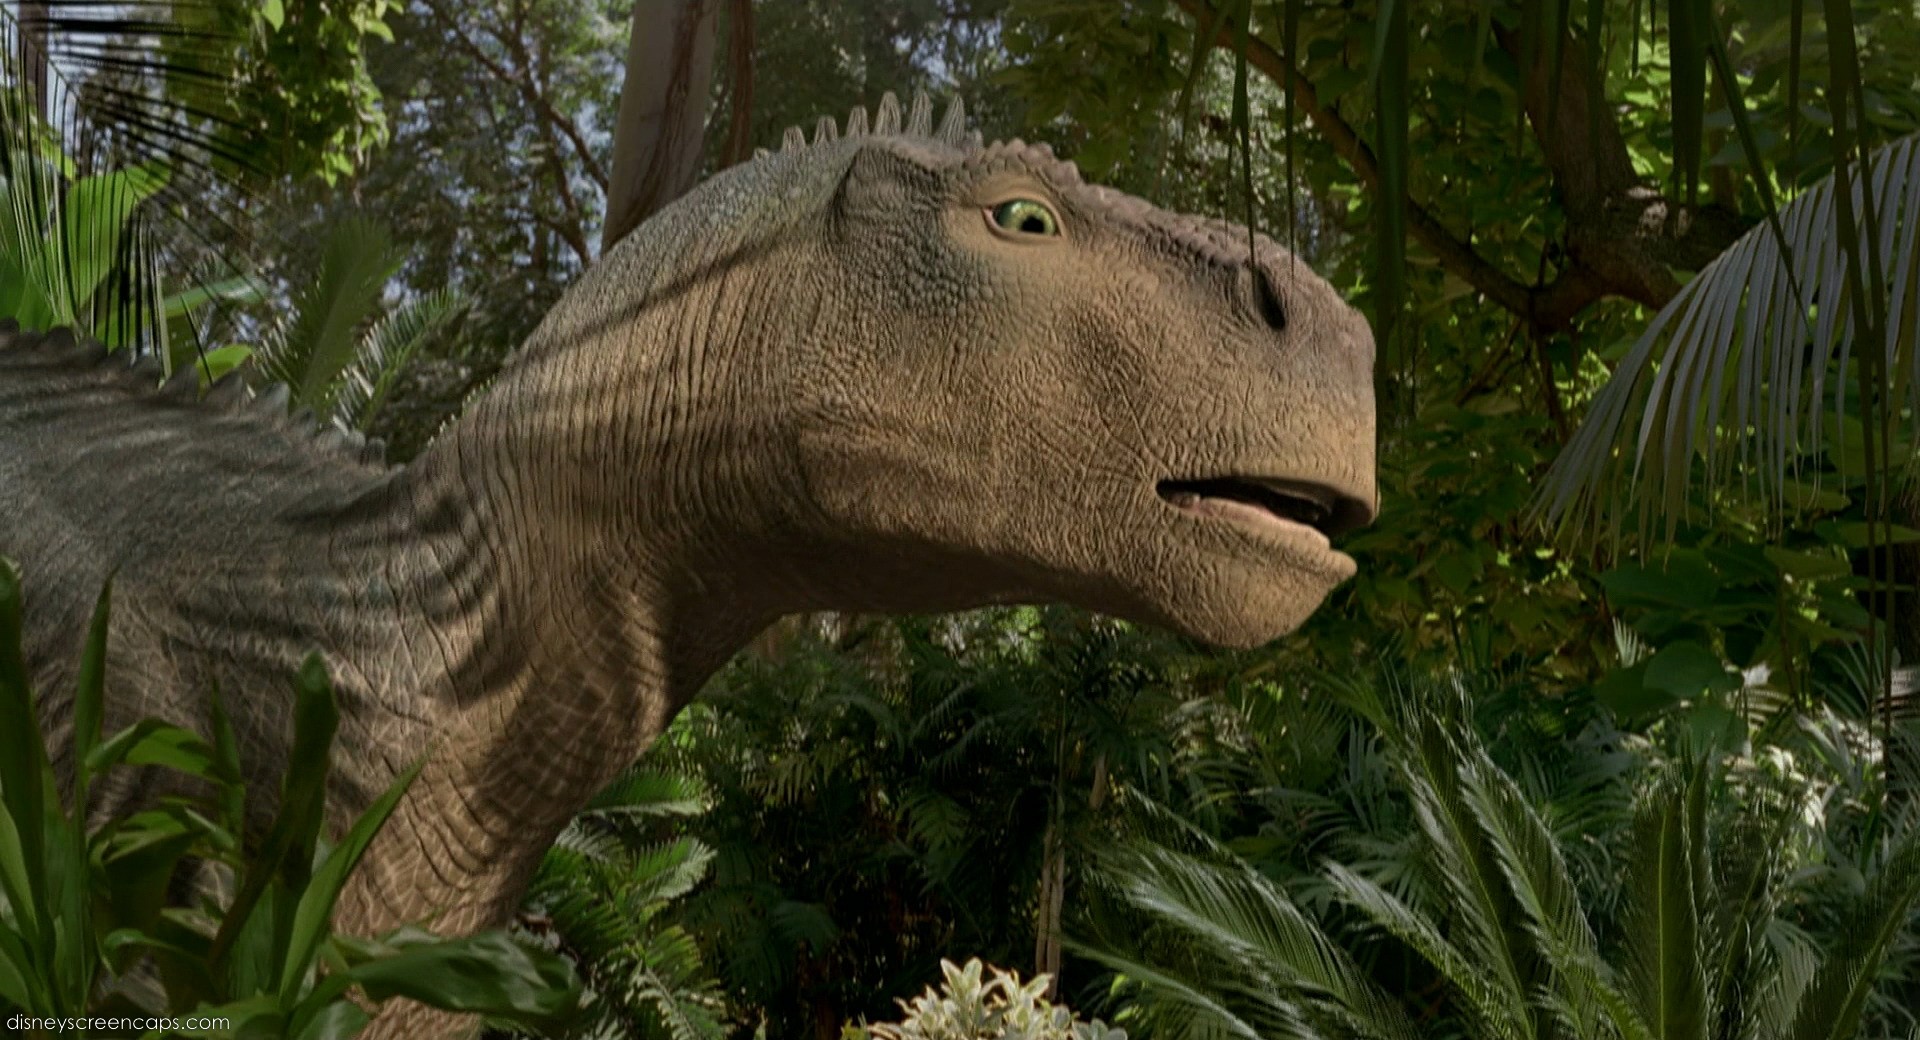 Can you name this dinosaur from Disney's (not Pixar's) first CGI film?